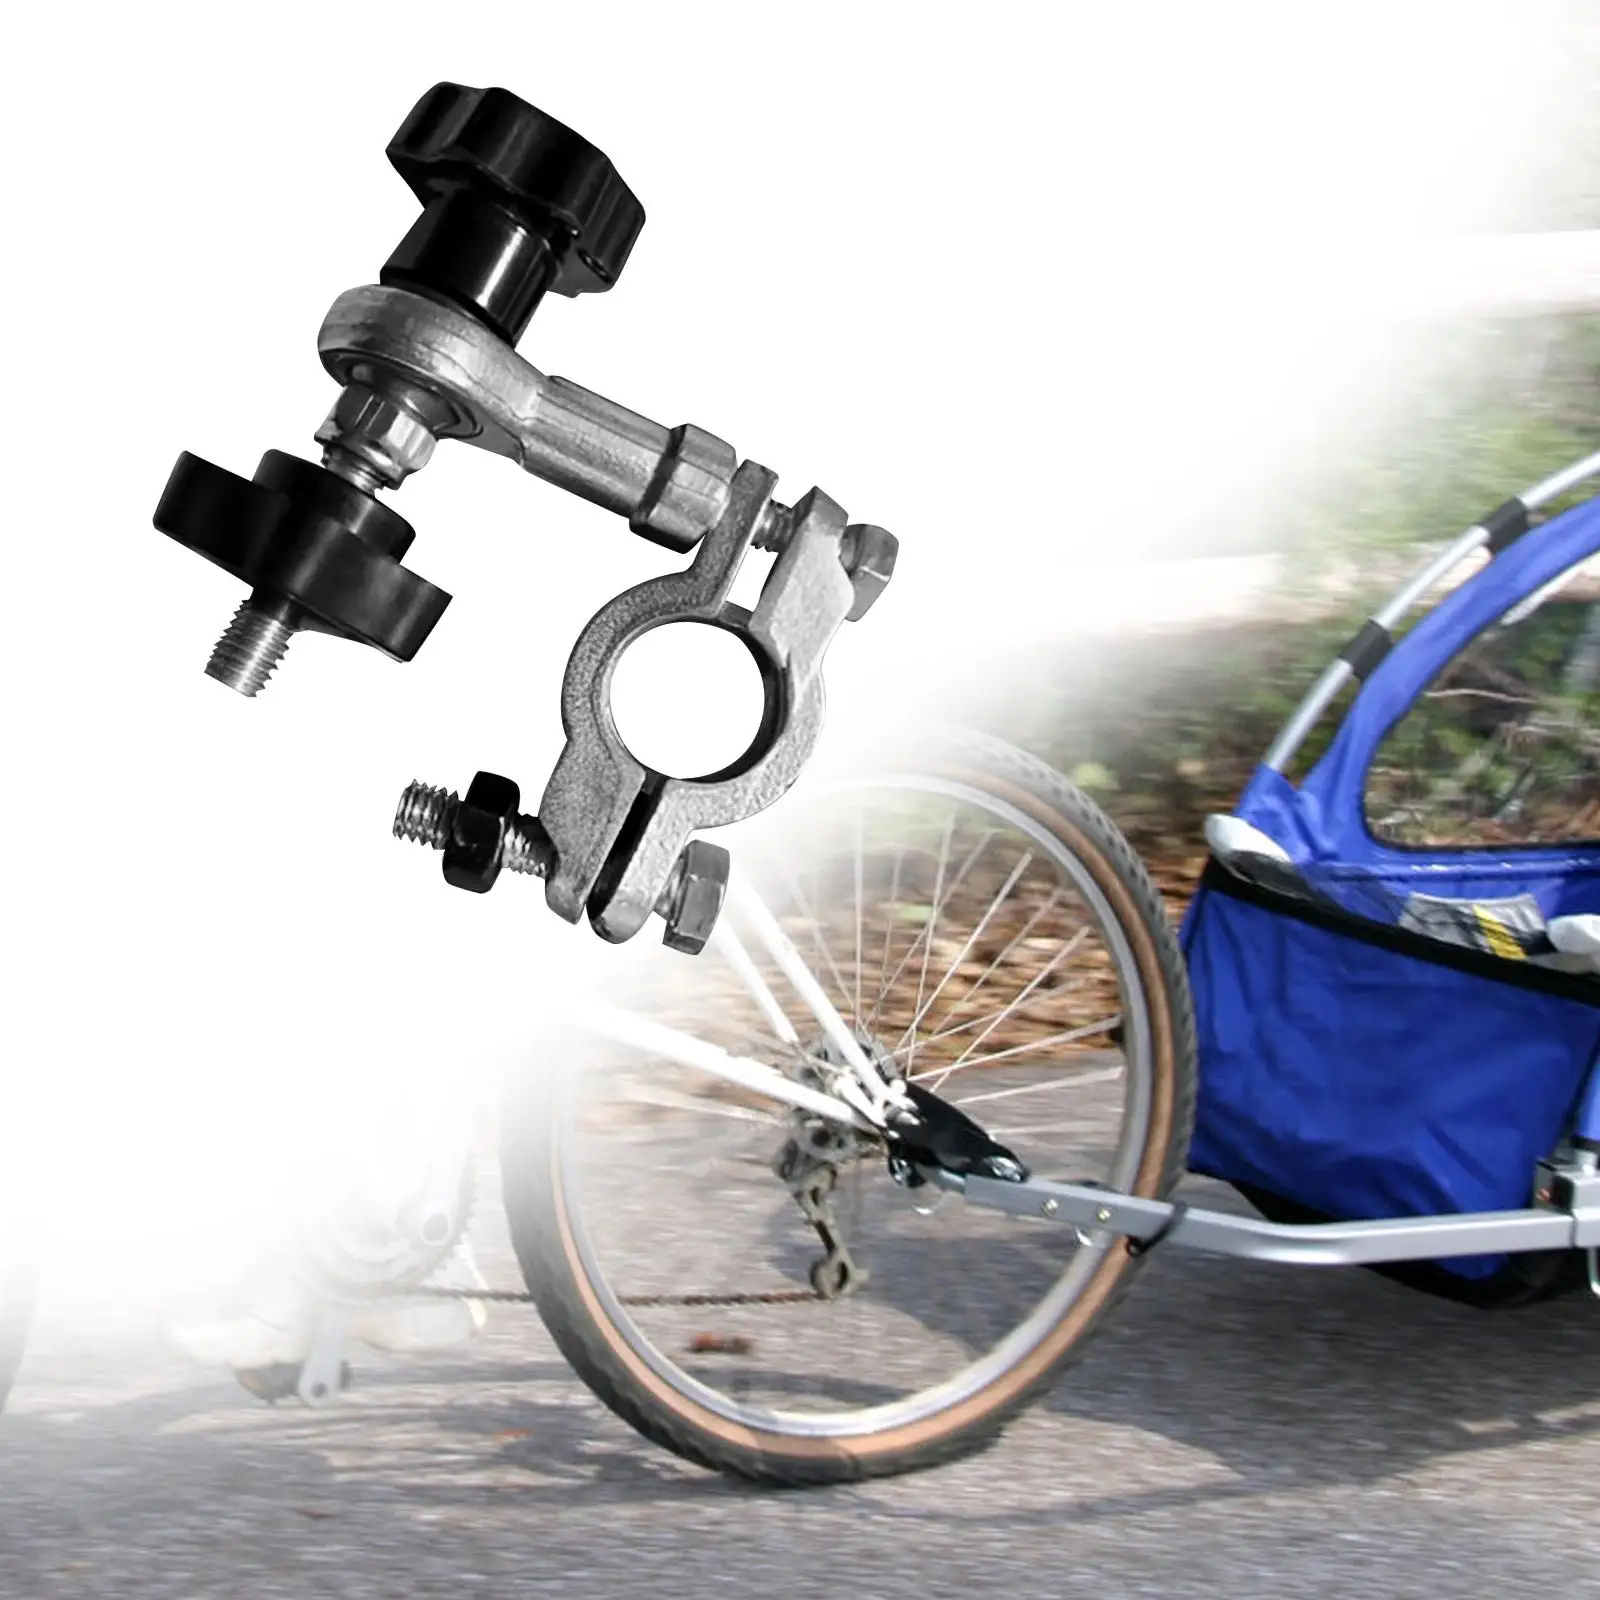 Bicycle Rear Trailer Connector Coupler Attachment Towing Solutions